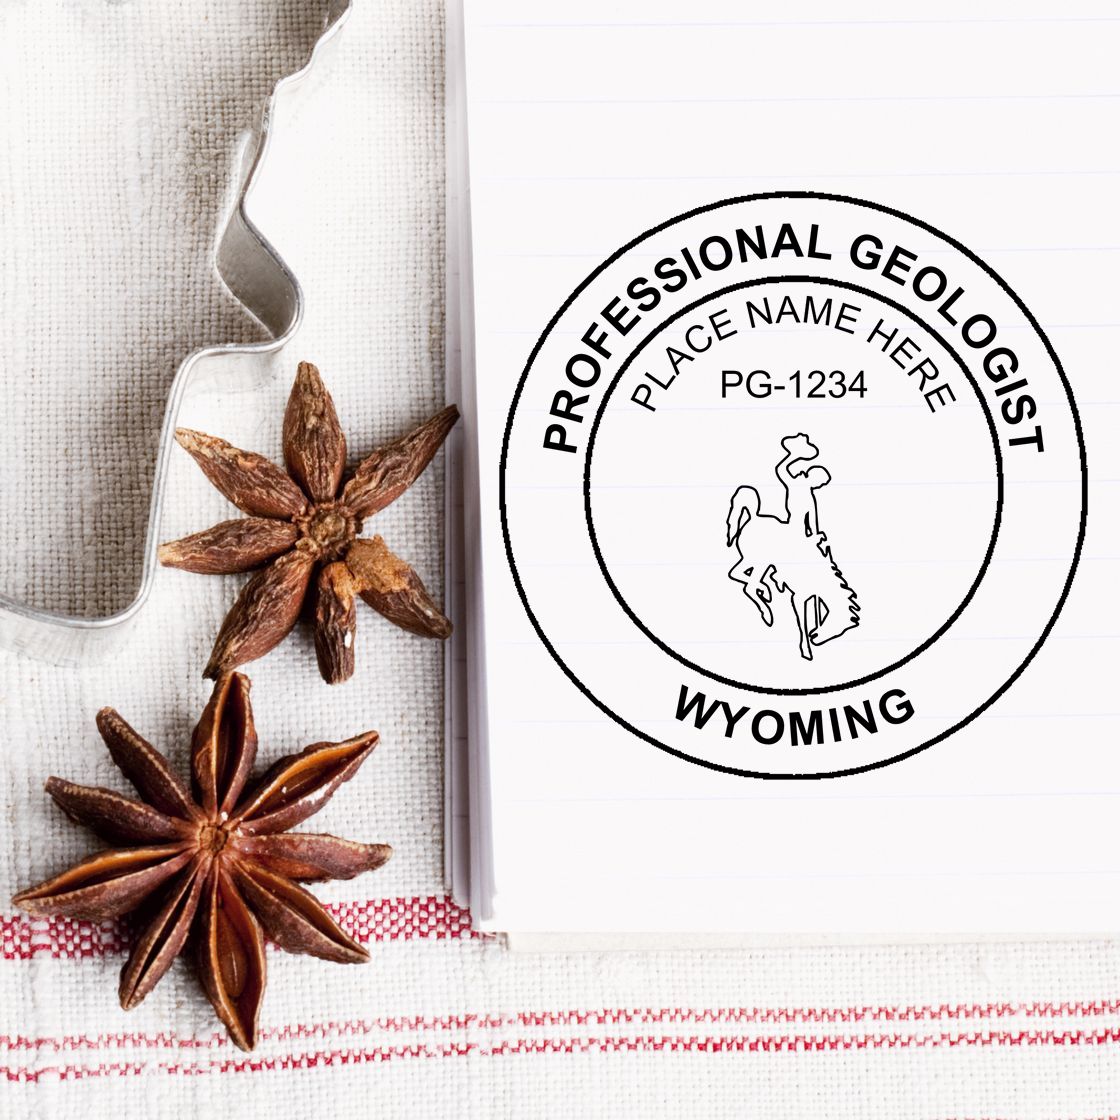 The Wyoming Professional Geologist Seal Stamp stamp impression comes to life with a crisp, detailed image stamped on paper - showcasing true professional quality.